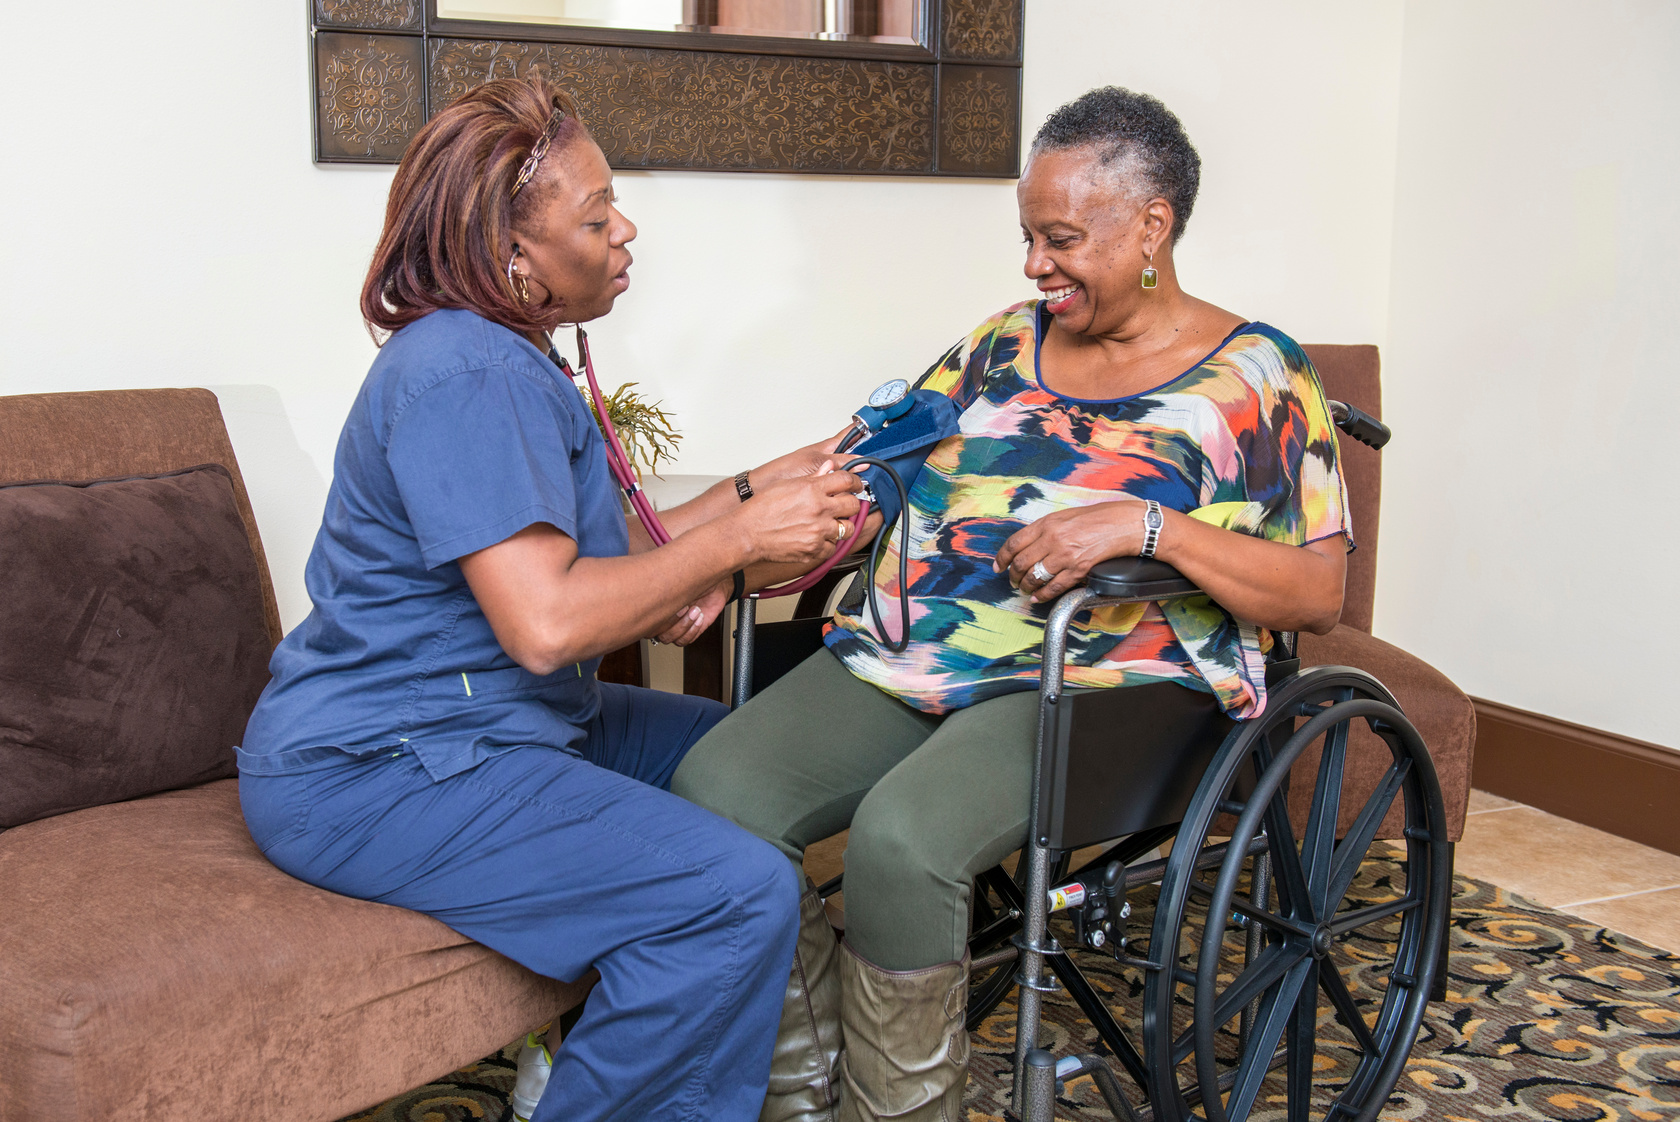 Home Health Care Worker and Senior Client